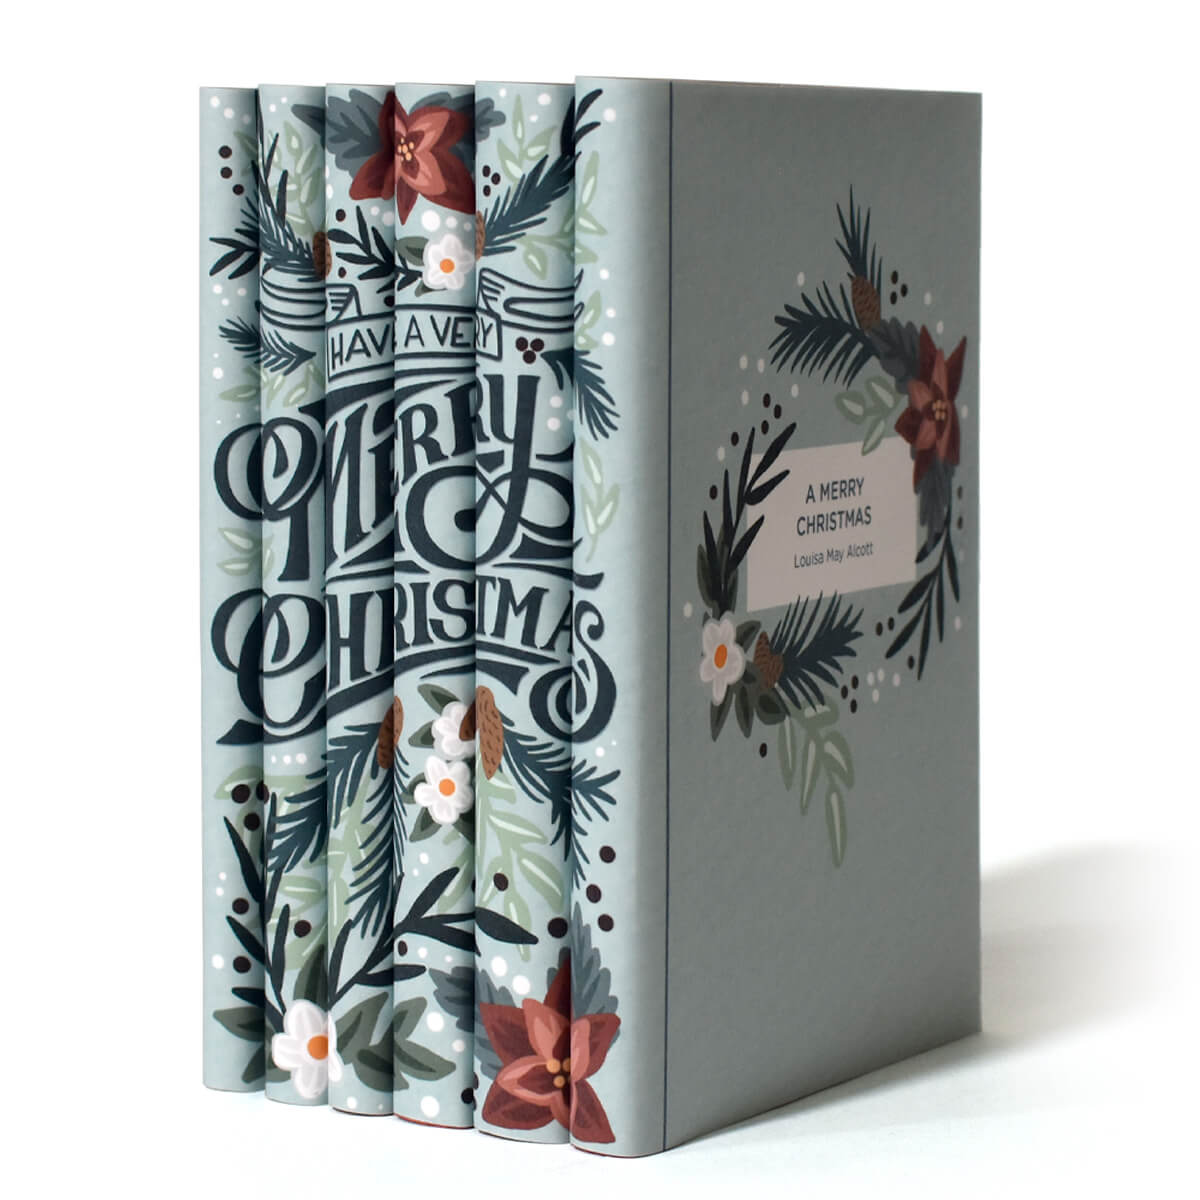 This festive set of novels is the perfect way to celebrate your favorite year-end traditions. Book Set, gift, trade, Christmas shopping. Merry Christmas written across spines featuring illustrated pine bows and pine cones.